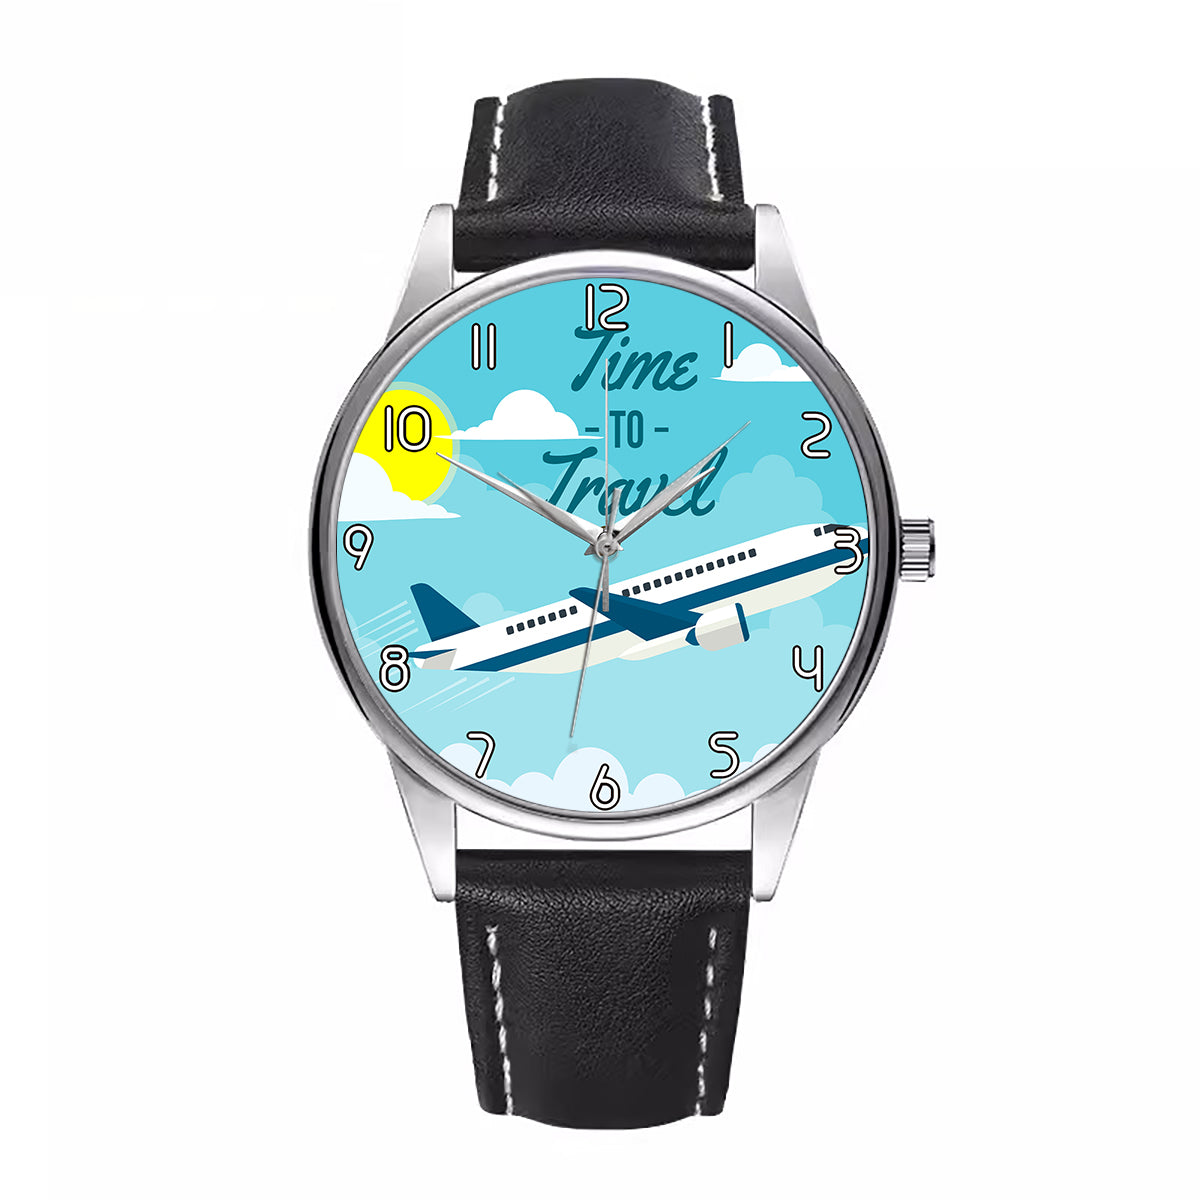 Time to Travel Designed Fashion Leather Strap Watches